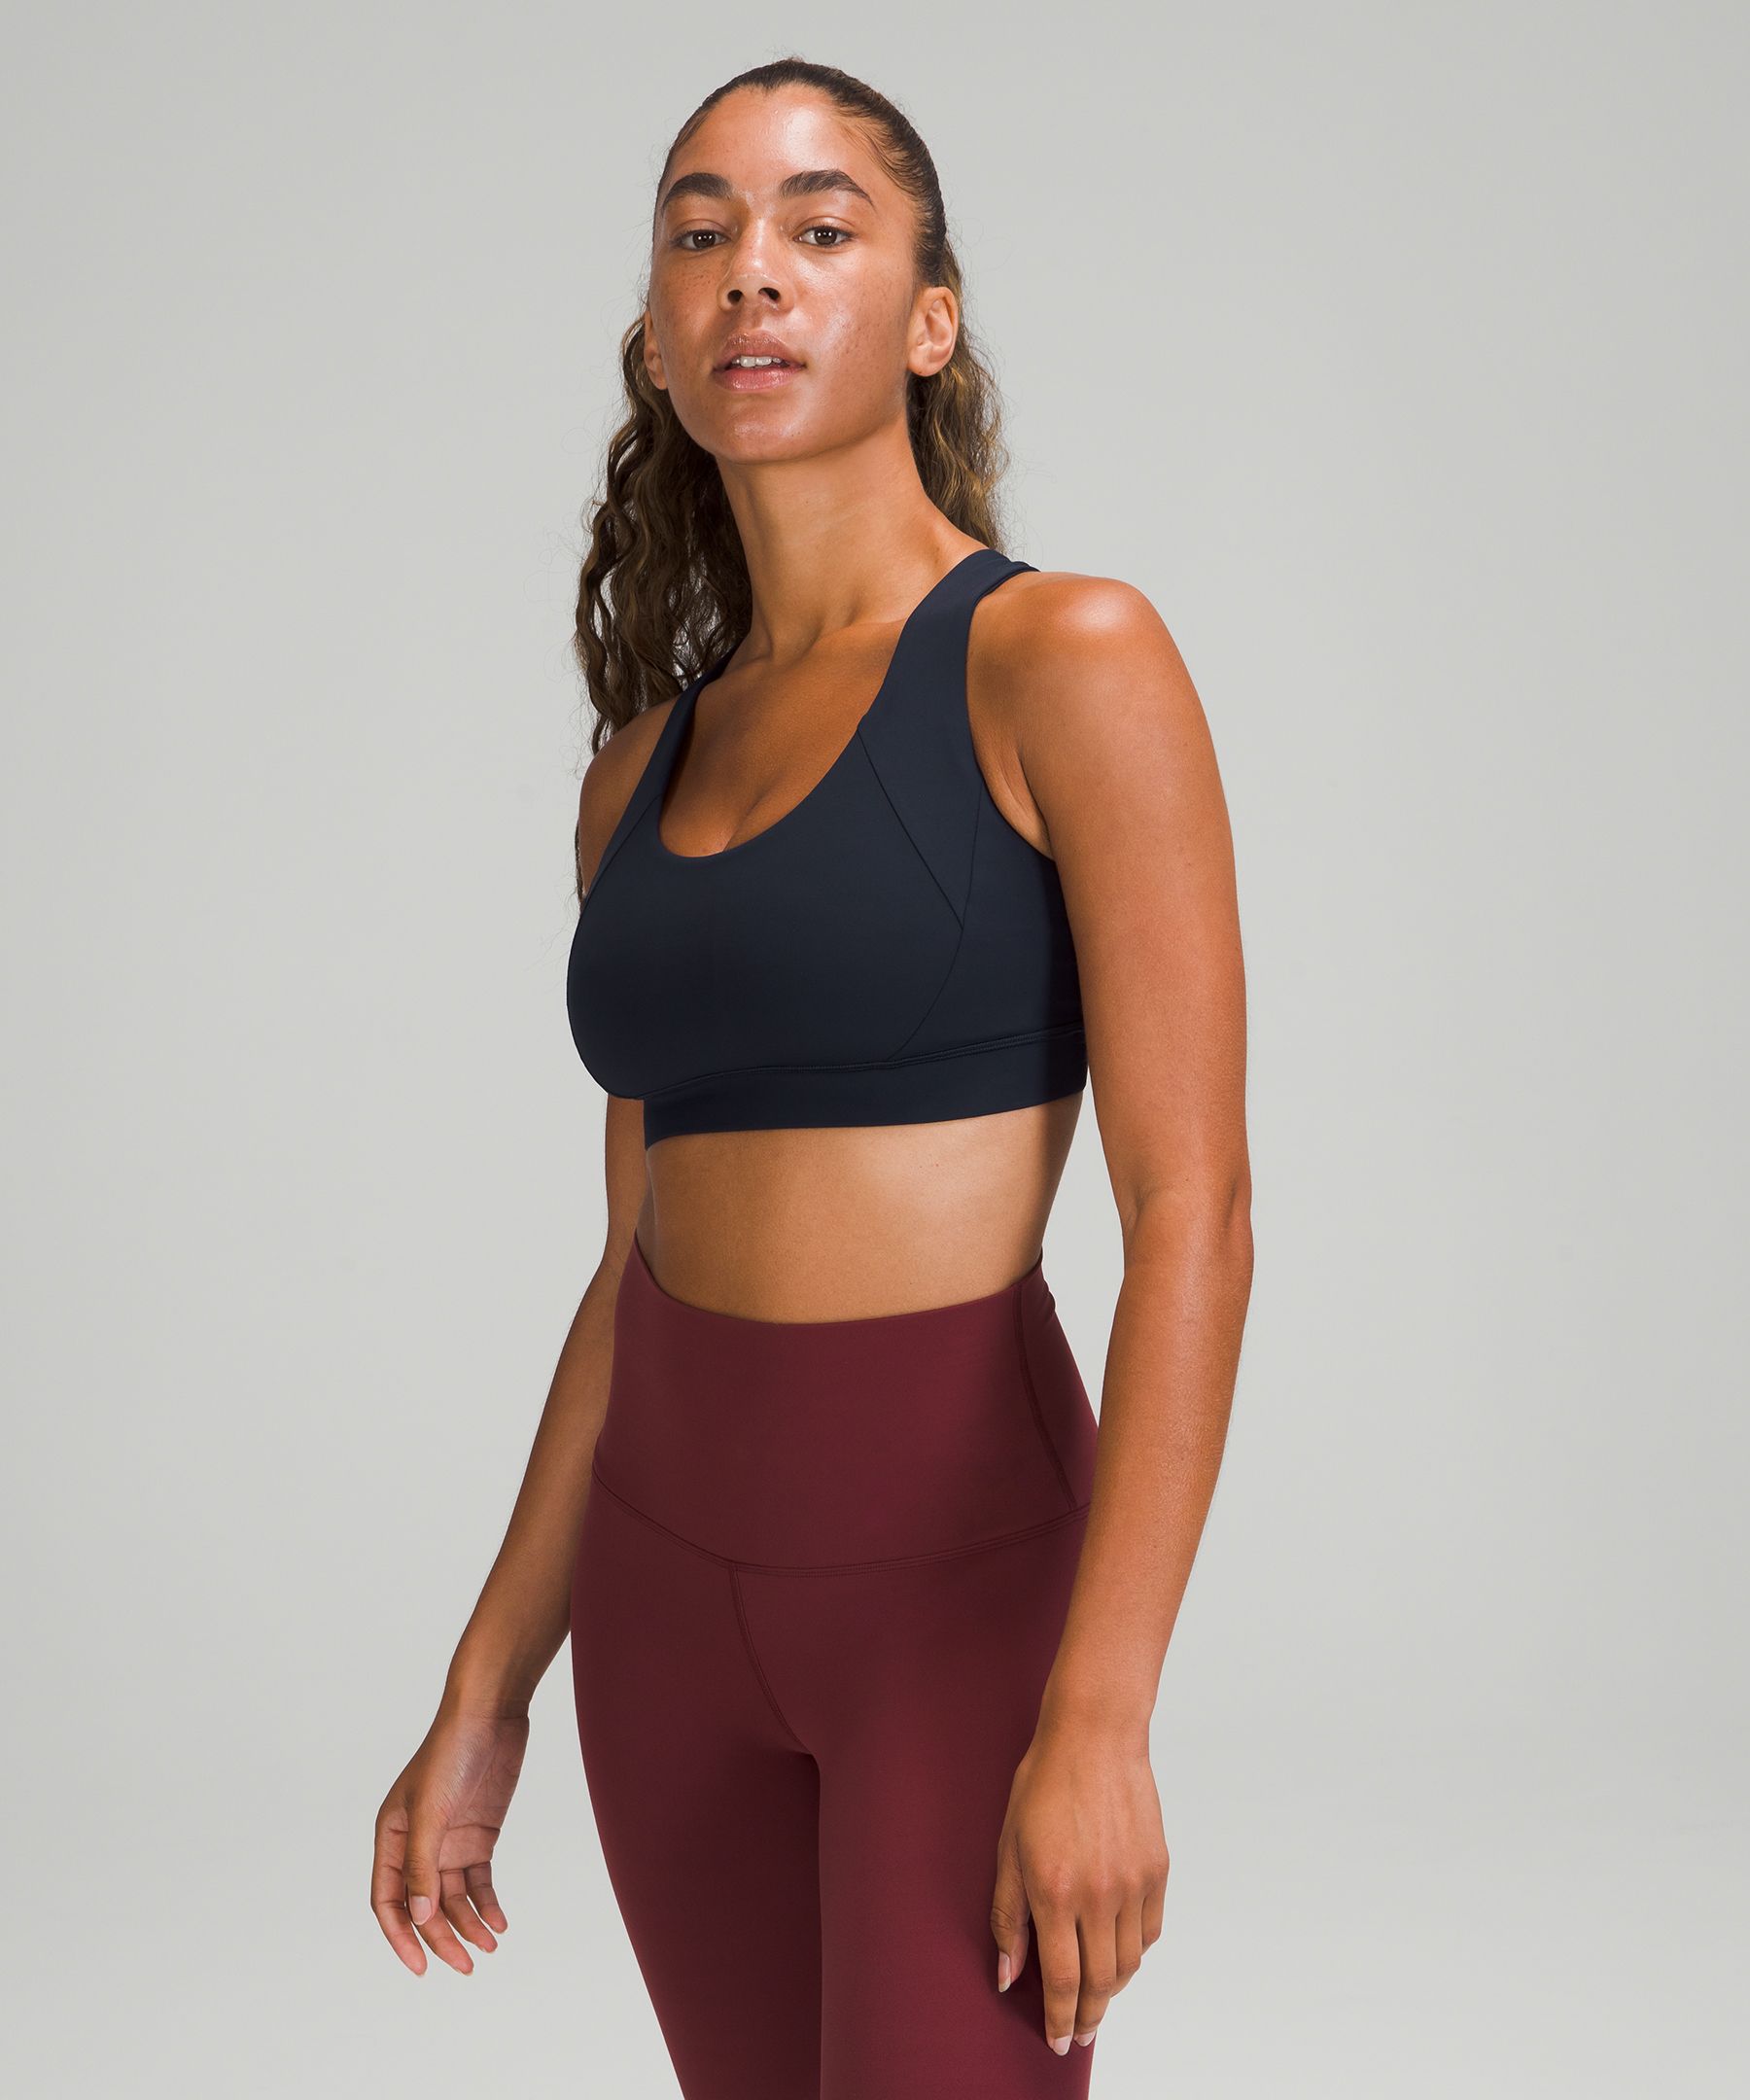 Lululemon athletica Free to Be Elevated Bra *Light Support, DD/DDD(E) Cup, Women's Bras